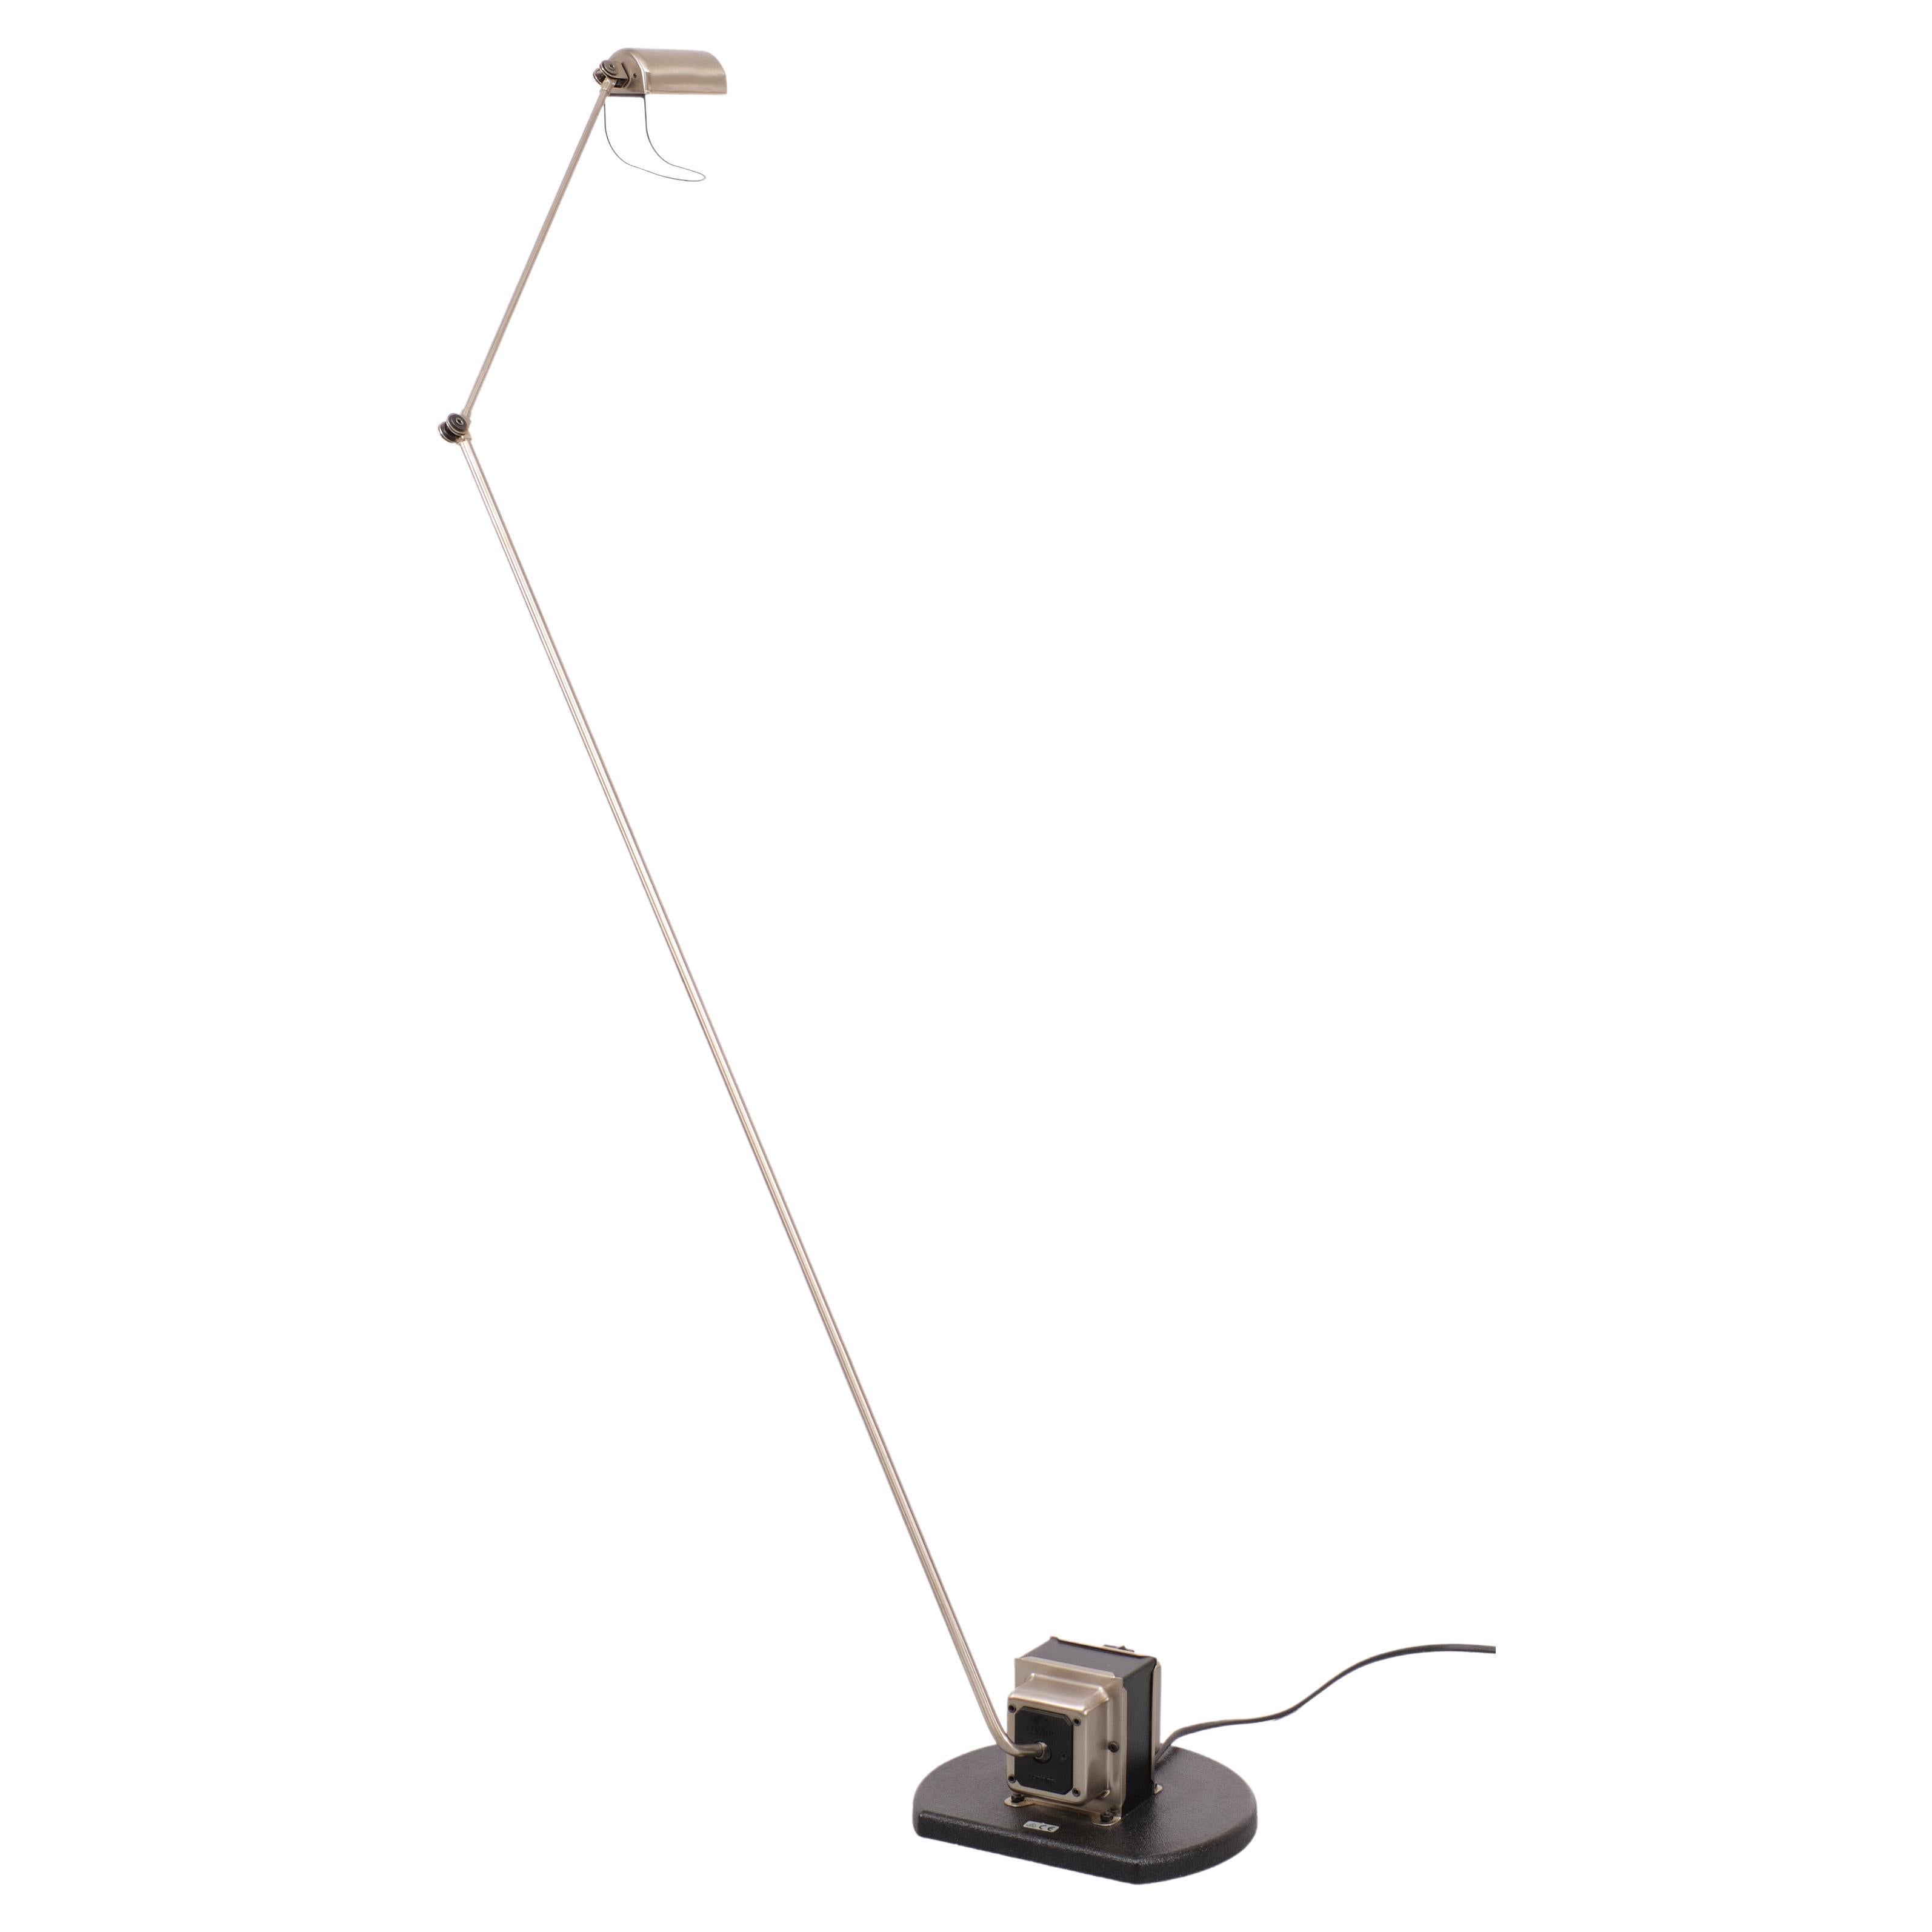 The Daphine Terra floor lamp  designed by Tomasso Cimini, has represented the essence of Lumina since 1975. The Daphine Terra floor lamp has a timeless combination of form and function. The lamp in Brushed Nickel  has an articulated arm with a 360Â°